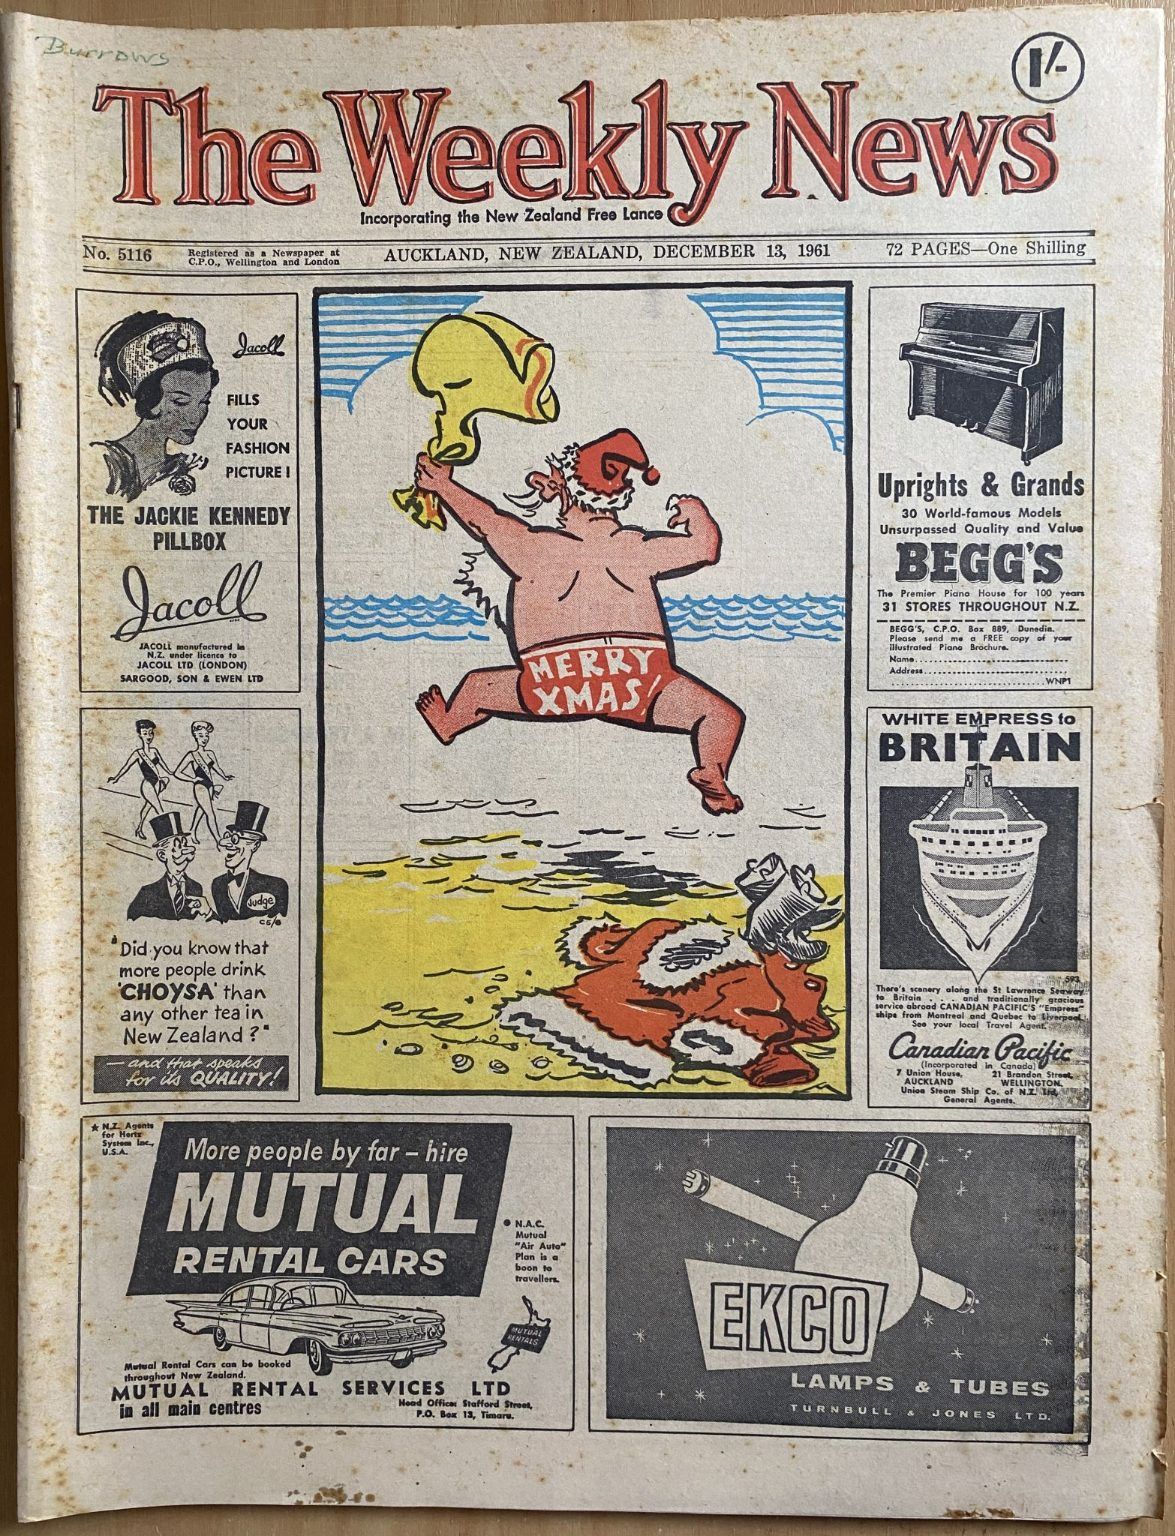 OLD NEWSPAPER: The Weekly News, No. 5116, 13 December 1961